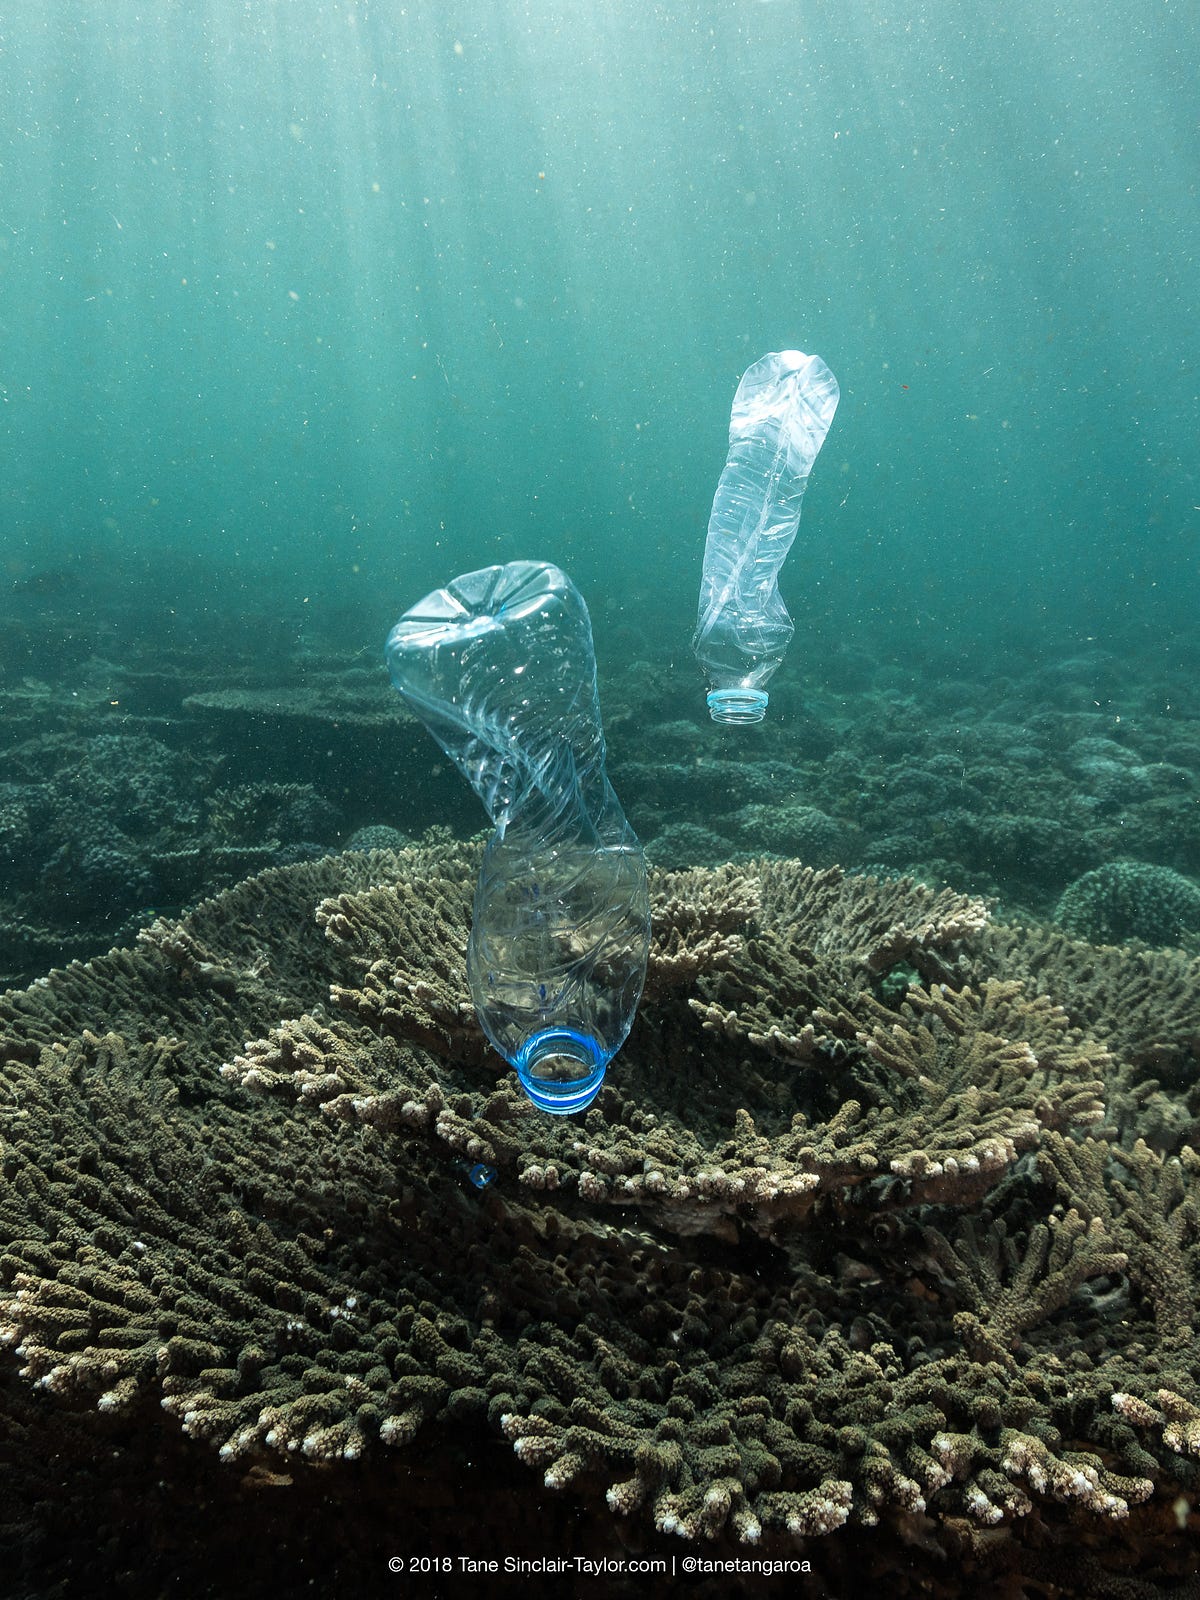 Ocean Pollution And Its Effects On The